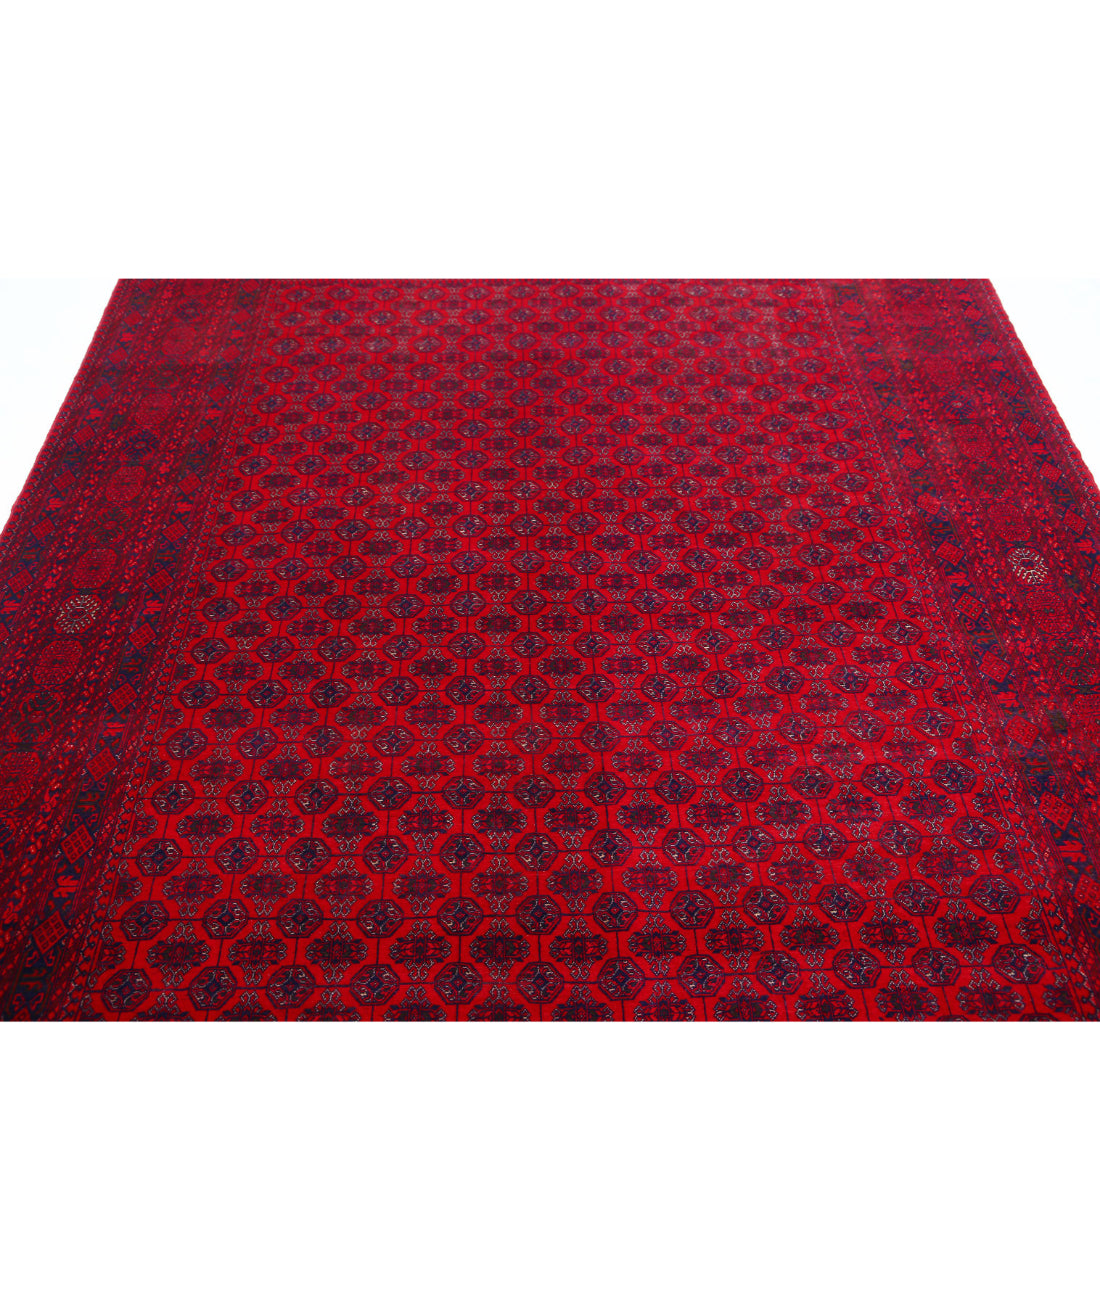 Hand Knotted Afghan Beljik Wool Rug - 6'5'' x 9'7'' 6'5'' x 9'7'' (193 X 288) / Red / Red